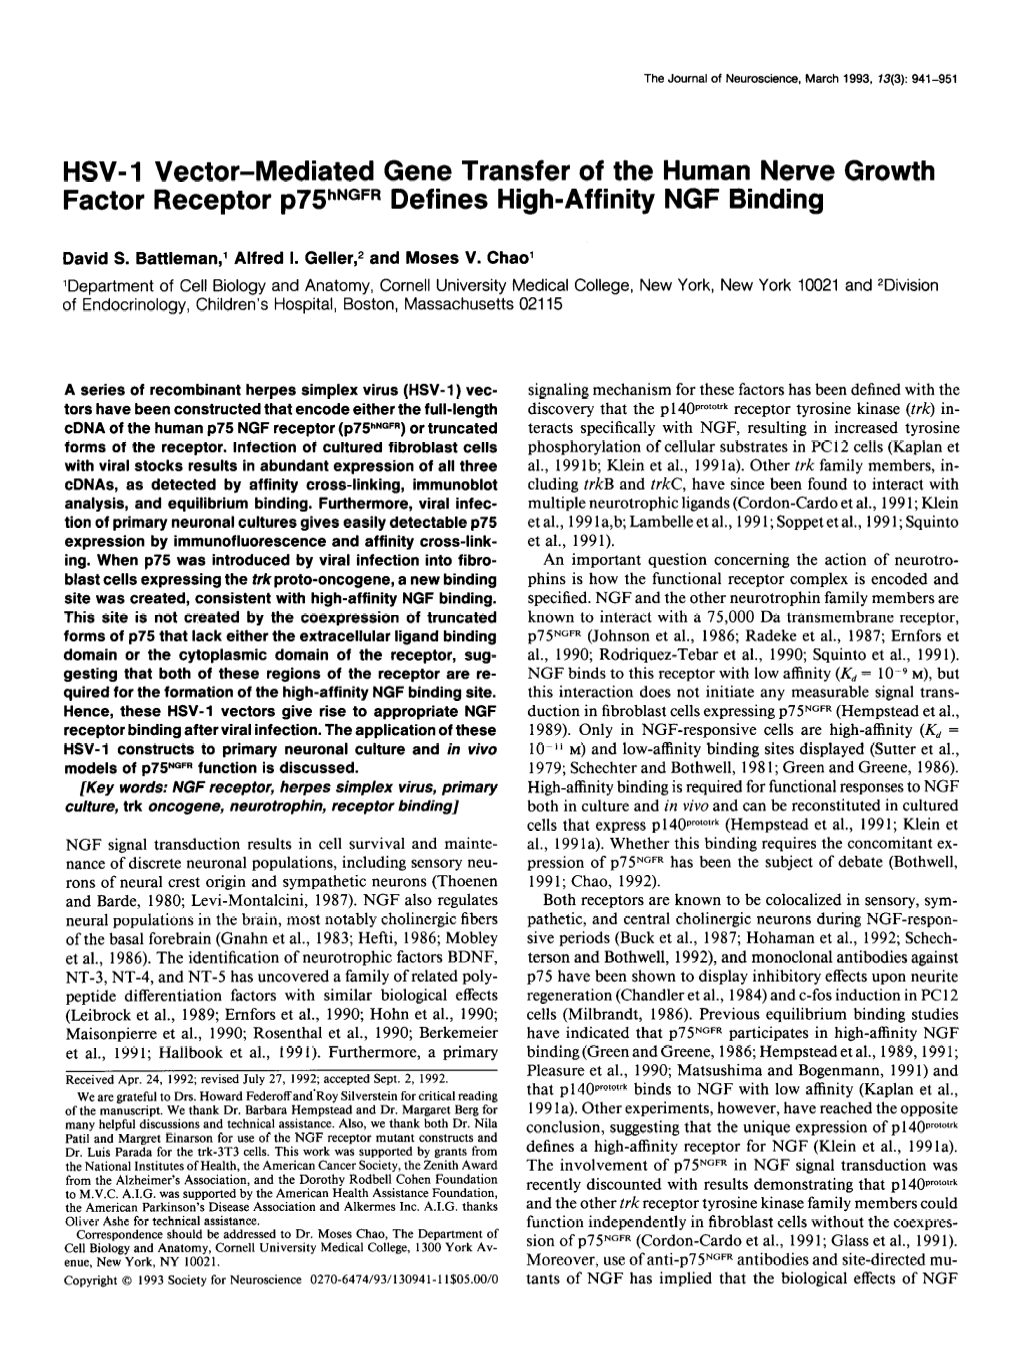 75 Hngfr Defines High-Affinity NGF Binding